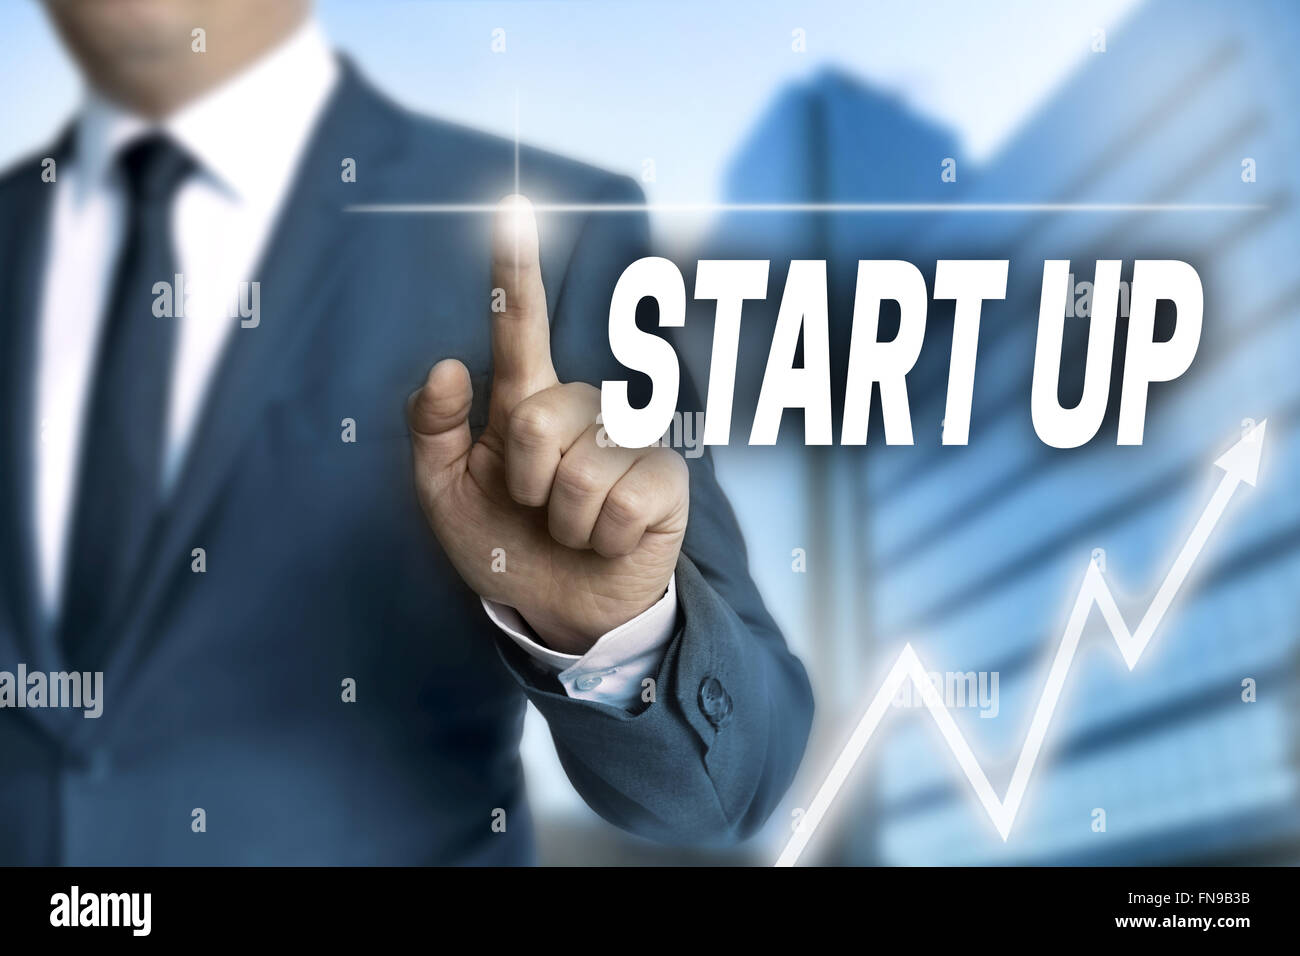 start up touchscreen is operated by businessman. Stock Photo